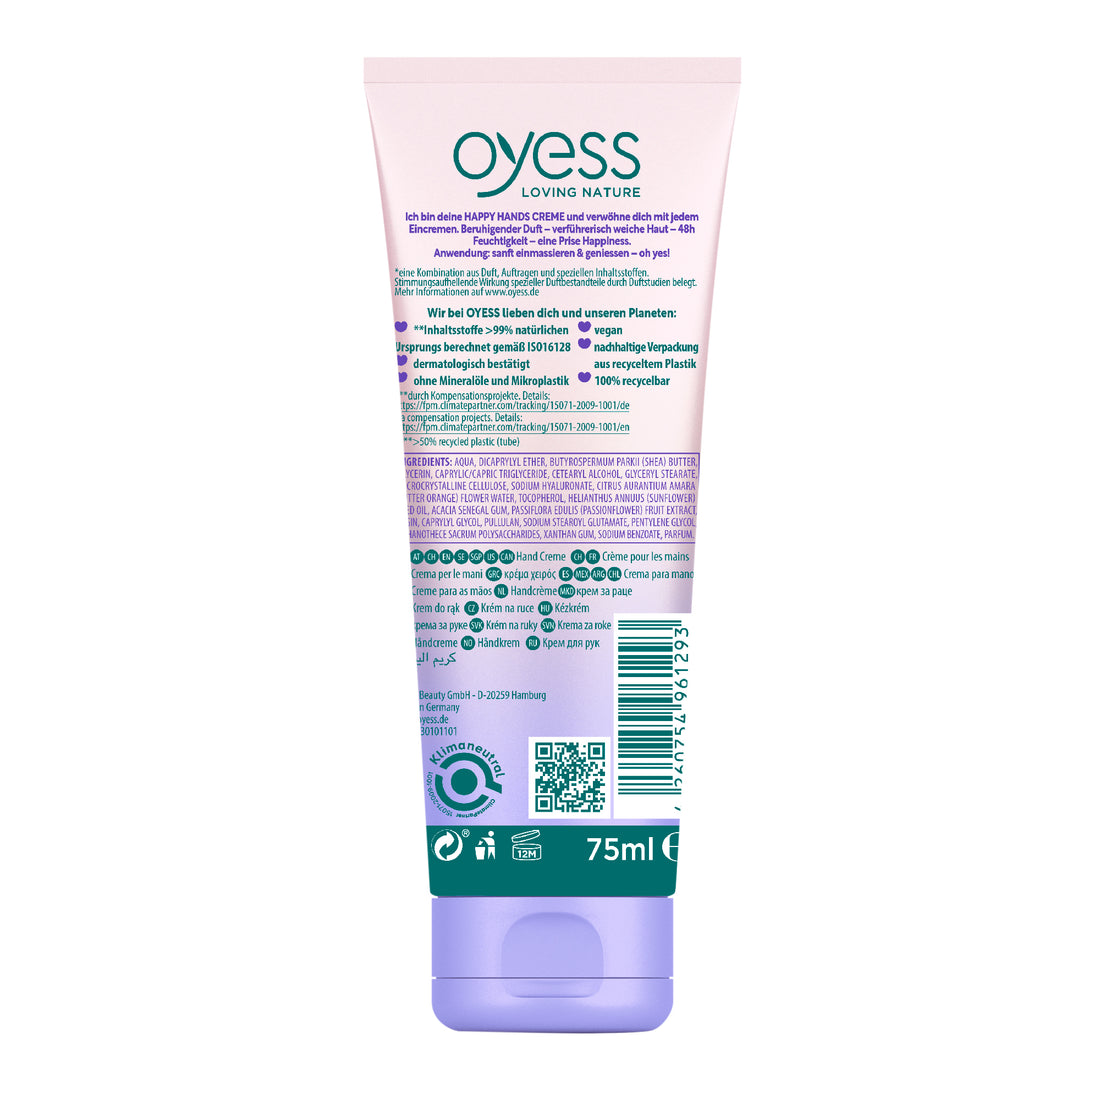 OYESS Happy Hands Creme - Caring 